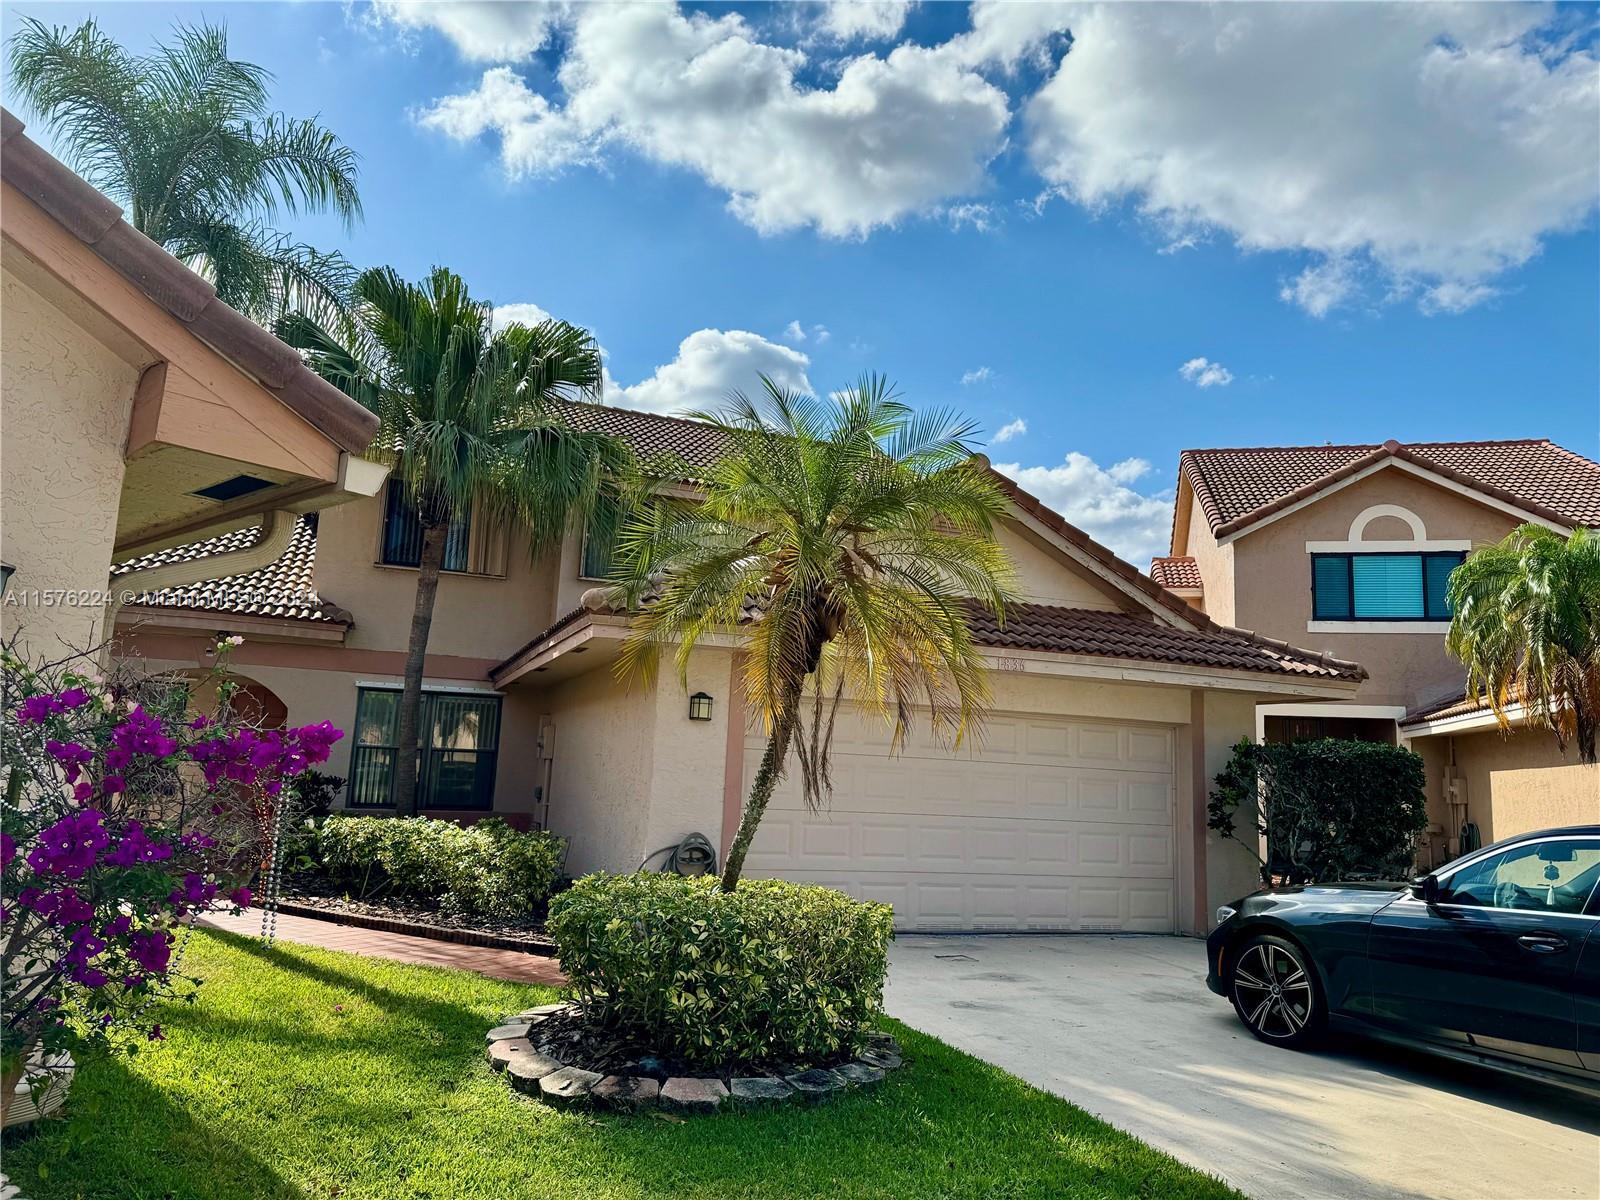 Photo of 1836 NW 94th Ave #0 in Plantation, FL